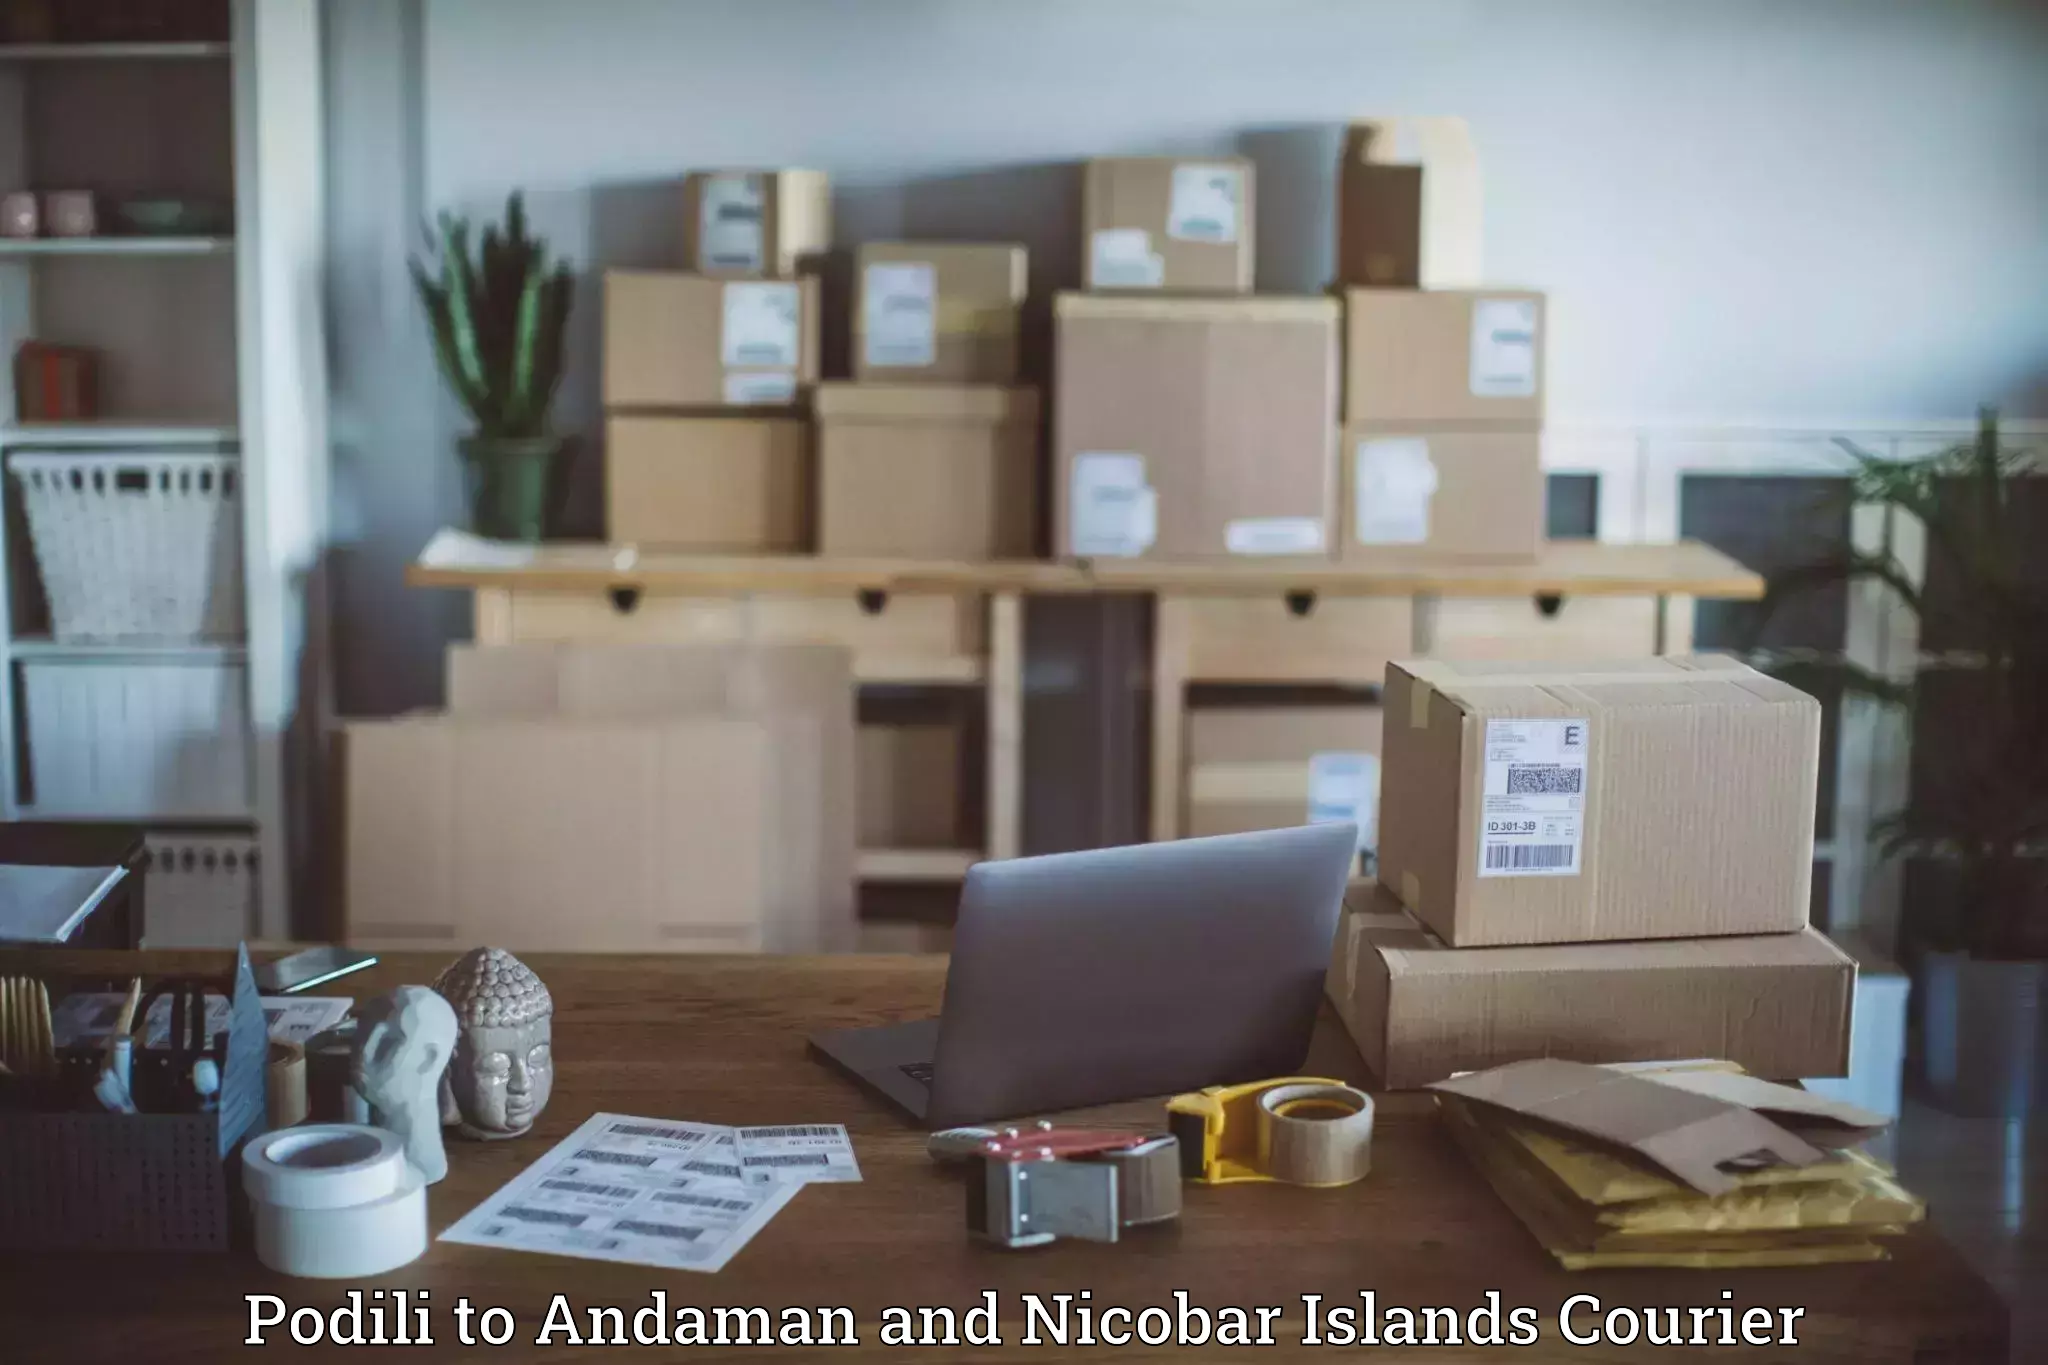 Parcel service for businesses Podili to Andaman and Nicobar Islands